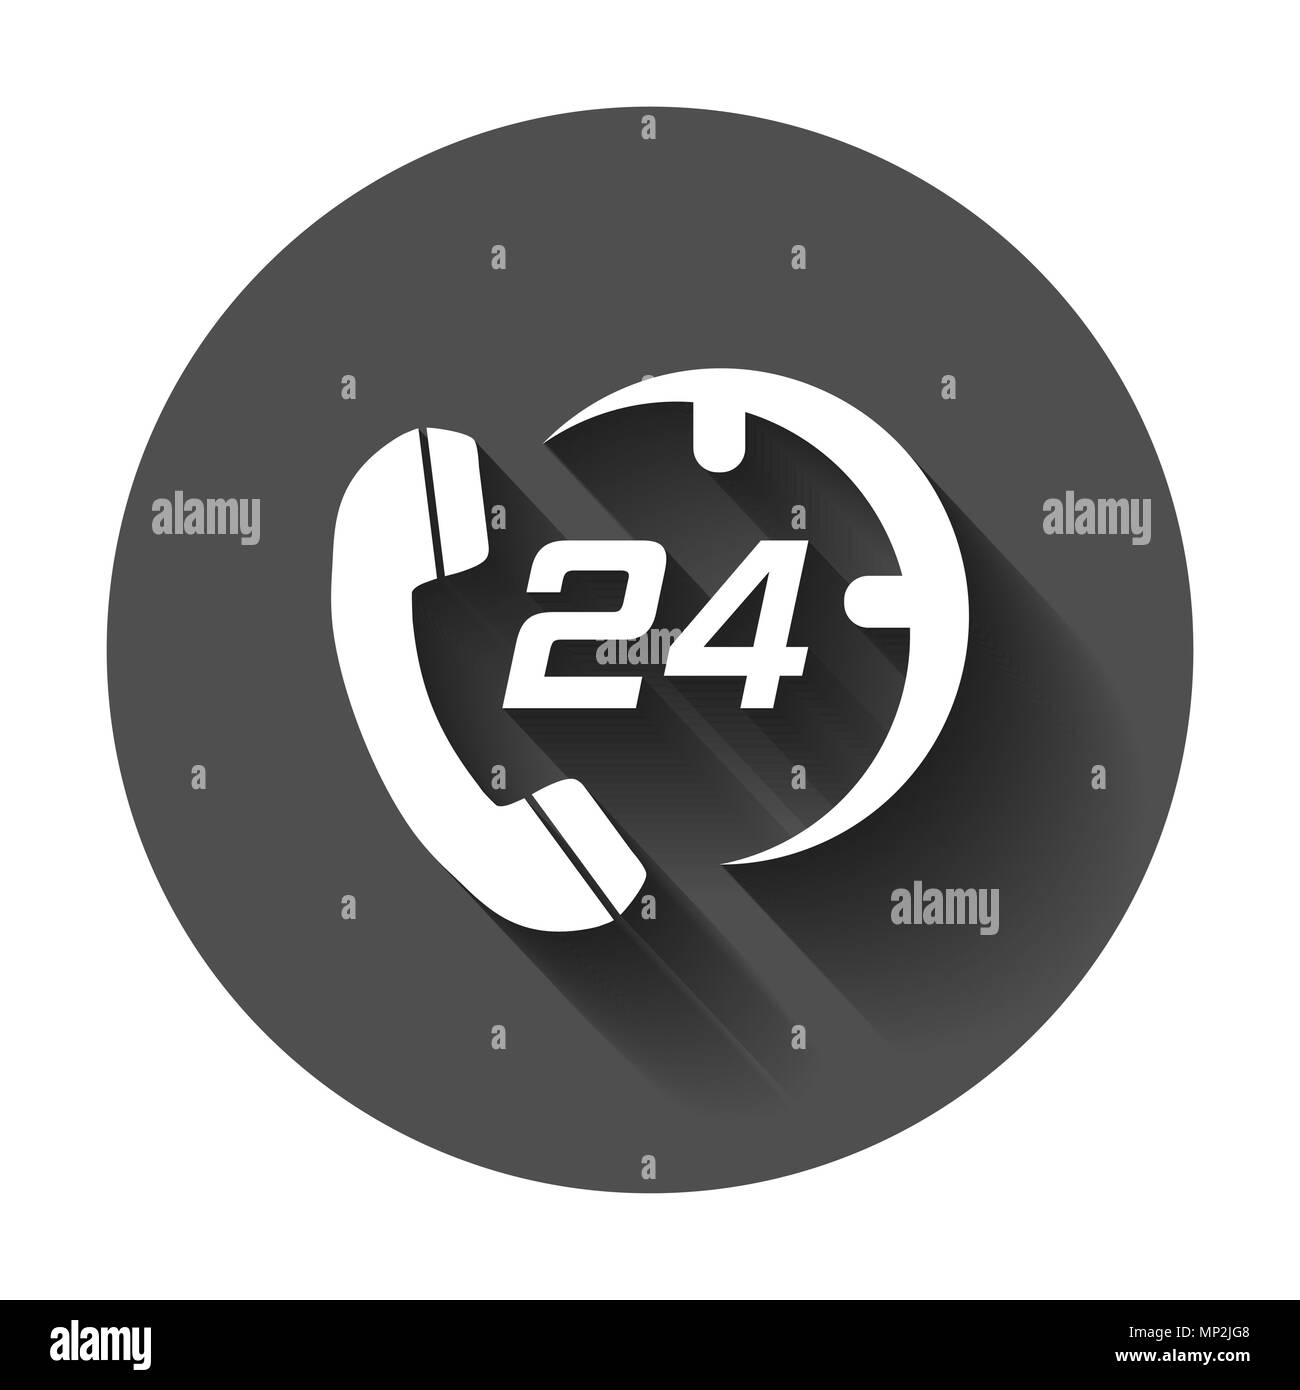 Technical support 24/7 vector icon in flat style. Phone clock help illustration with long shadow. Computer service support concept. Stock Vector